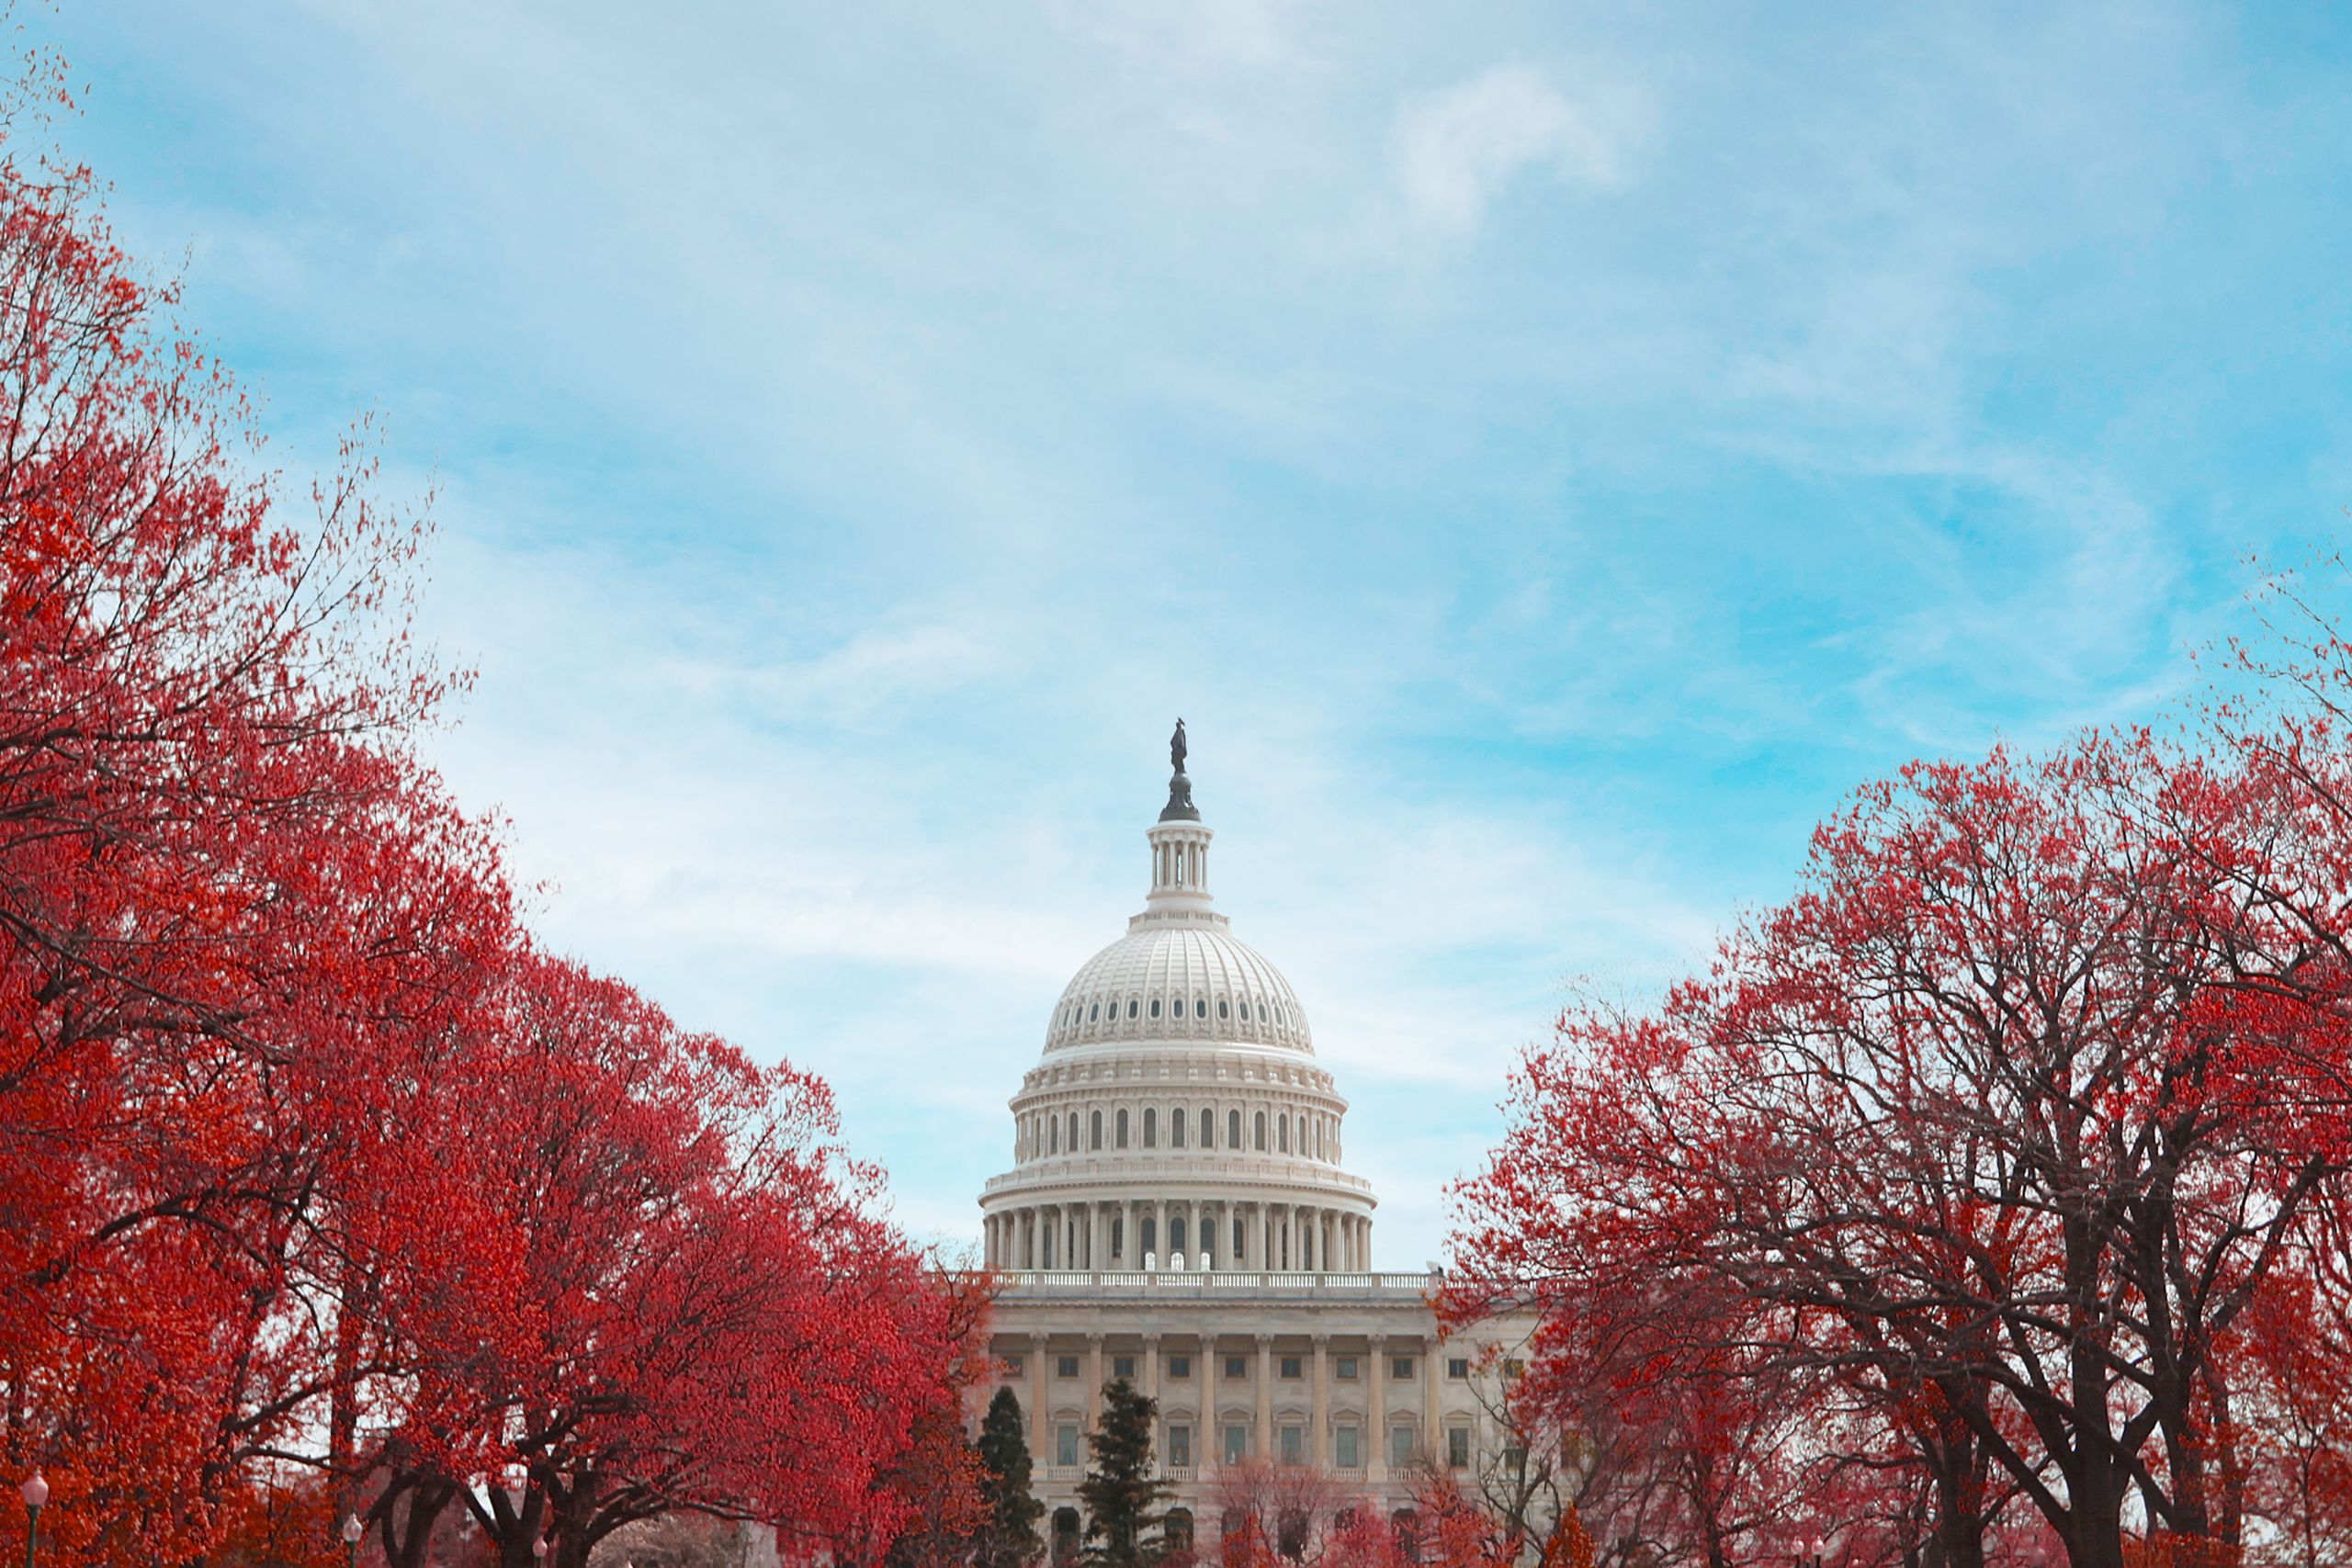 Maple trees with red leaves flank the U.S. Capitol building